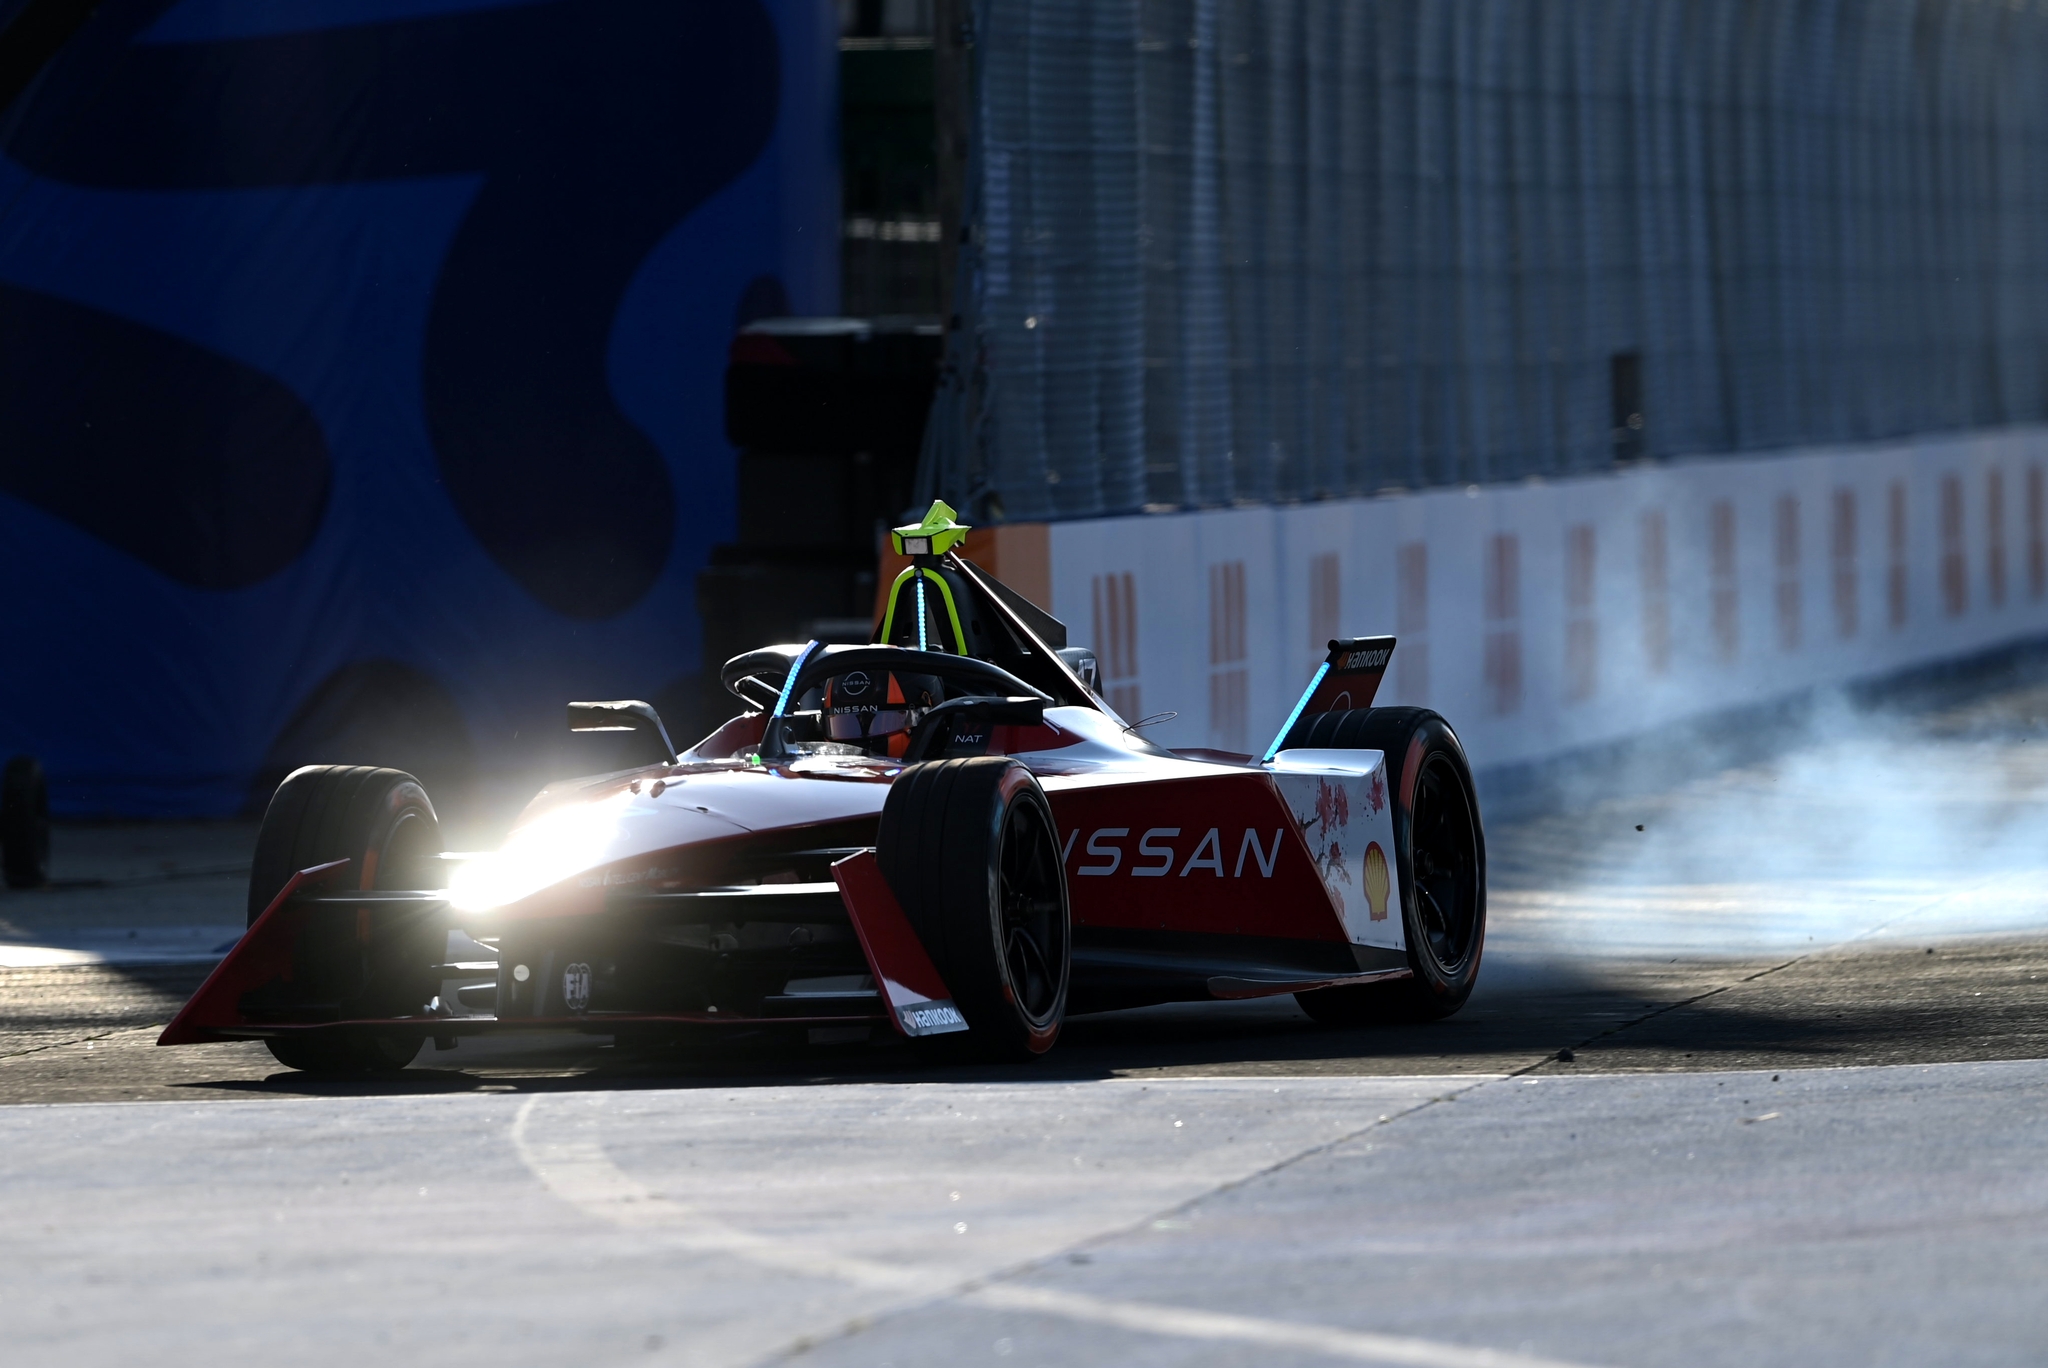 the formula e signings causing ‘discomfort’ among rivals